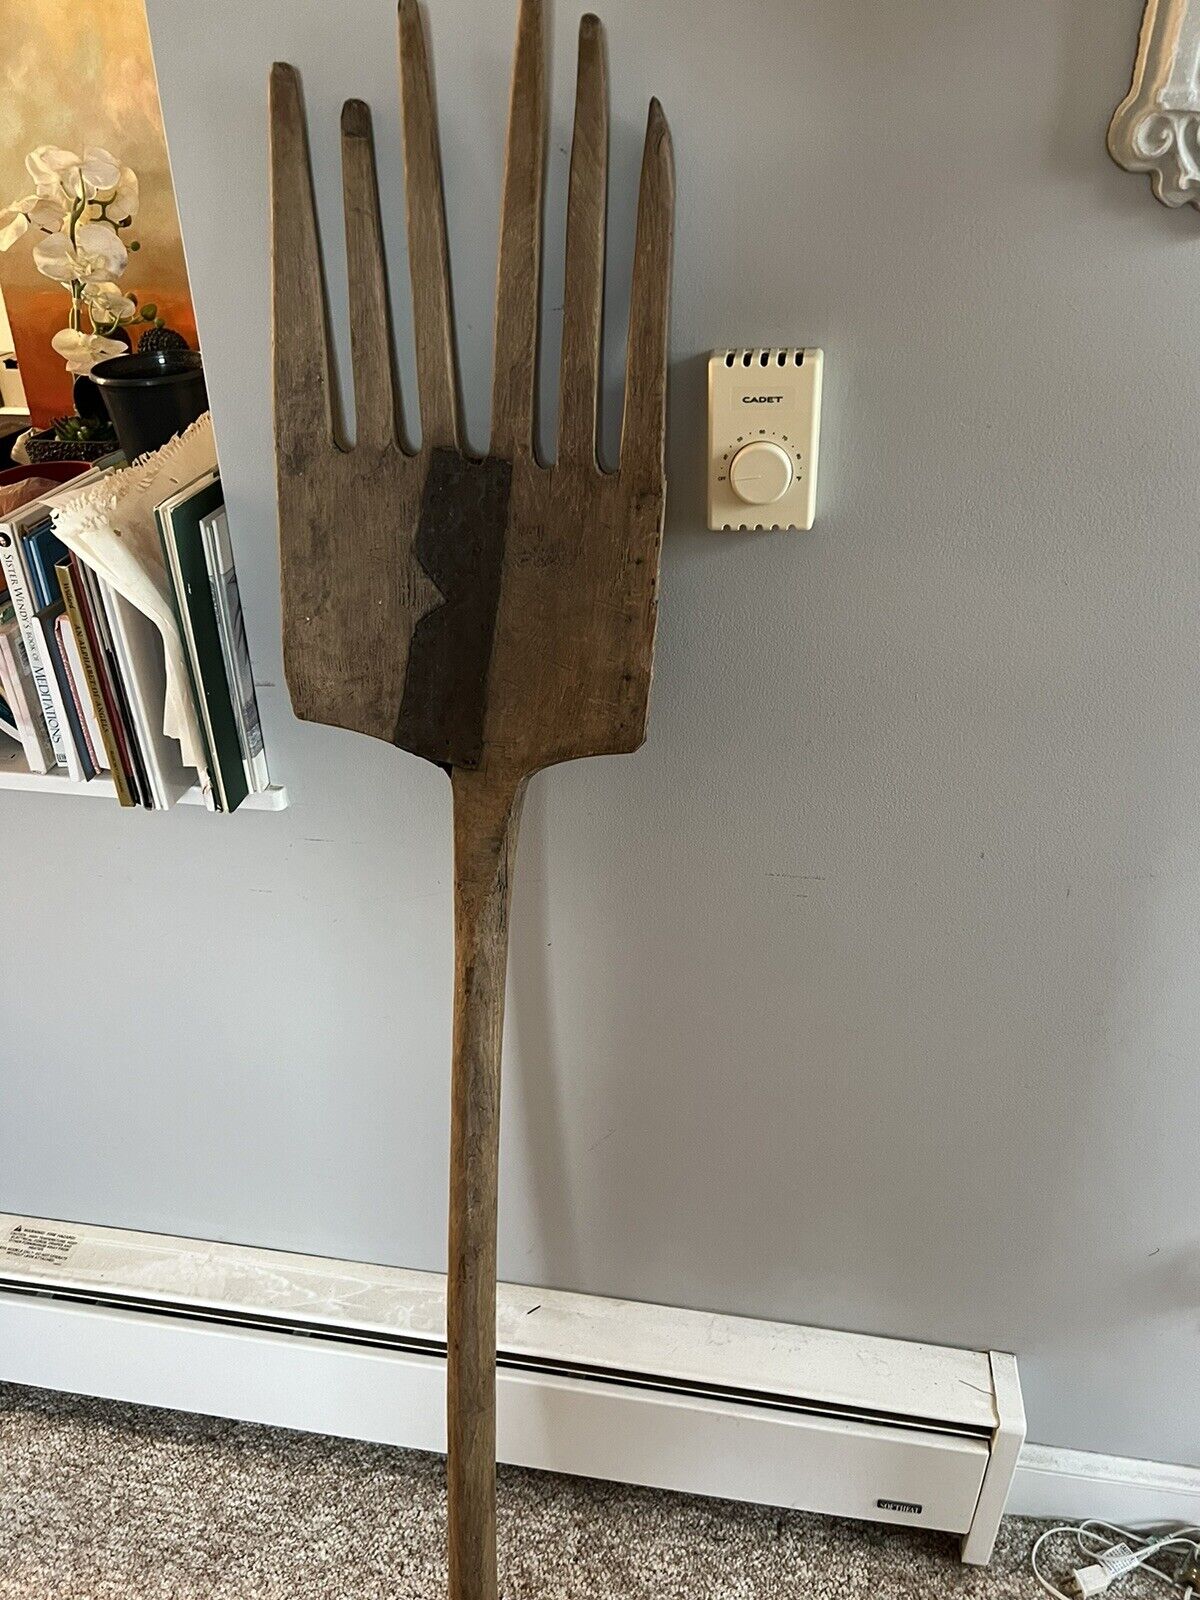 Antique AmishWood Hay Fork Pitchfork Hand Carved From One Tree -6 Tines